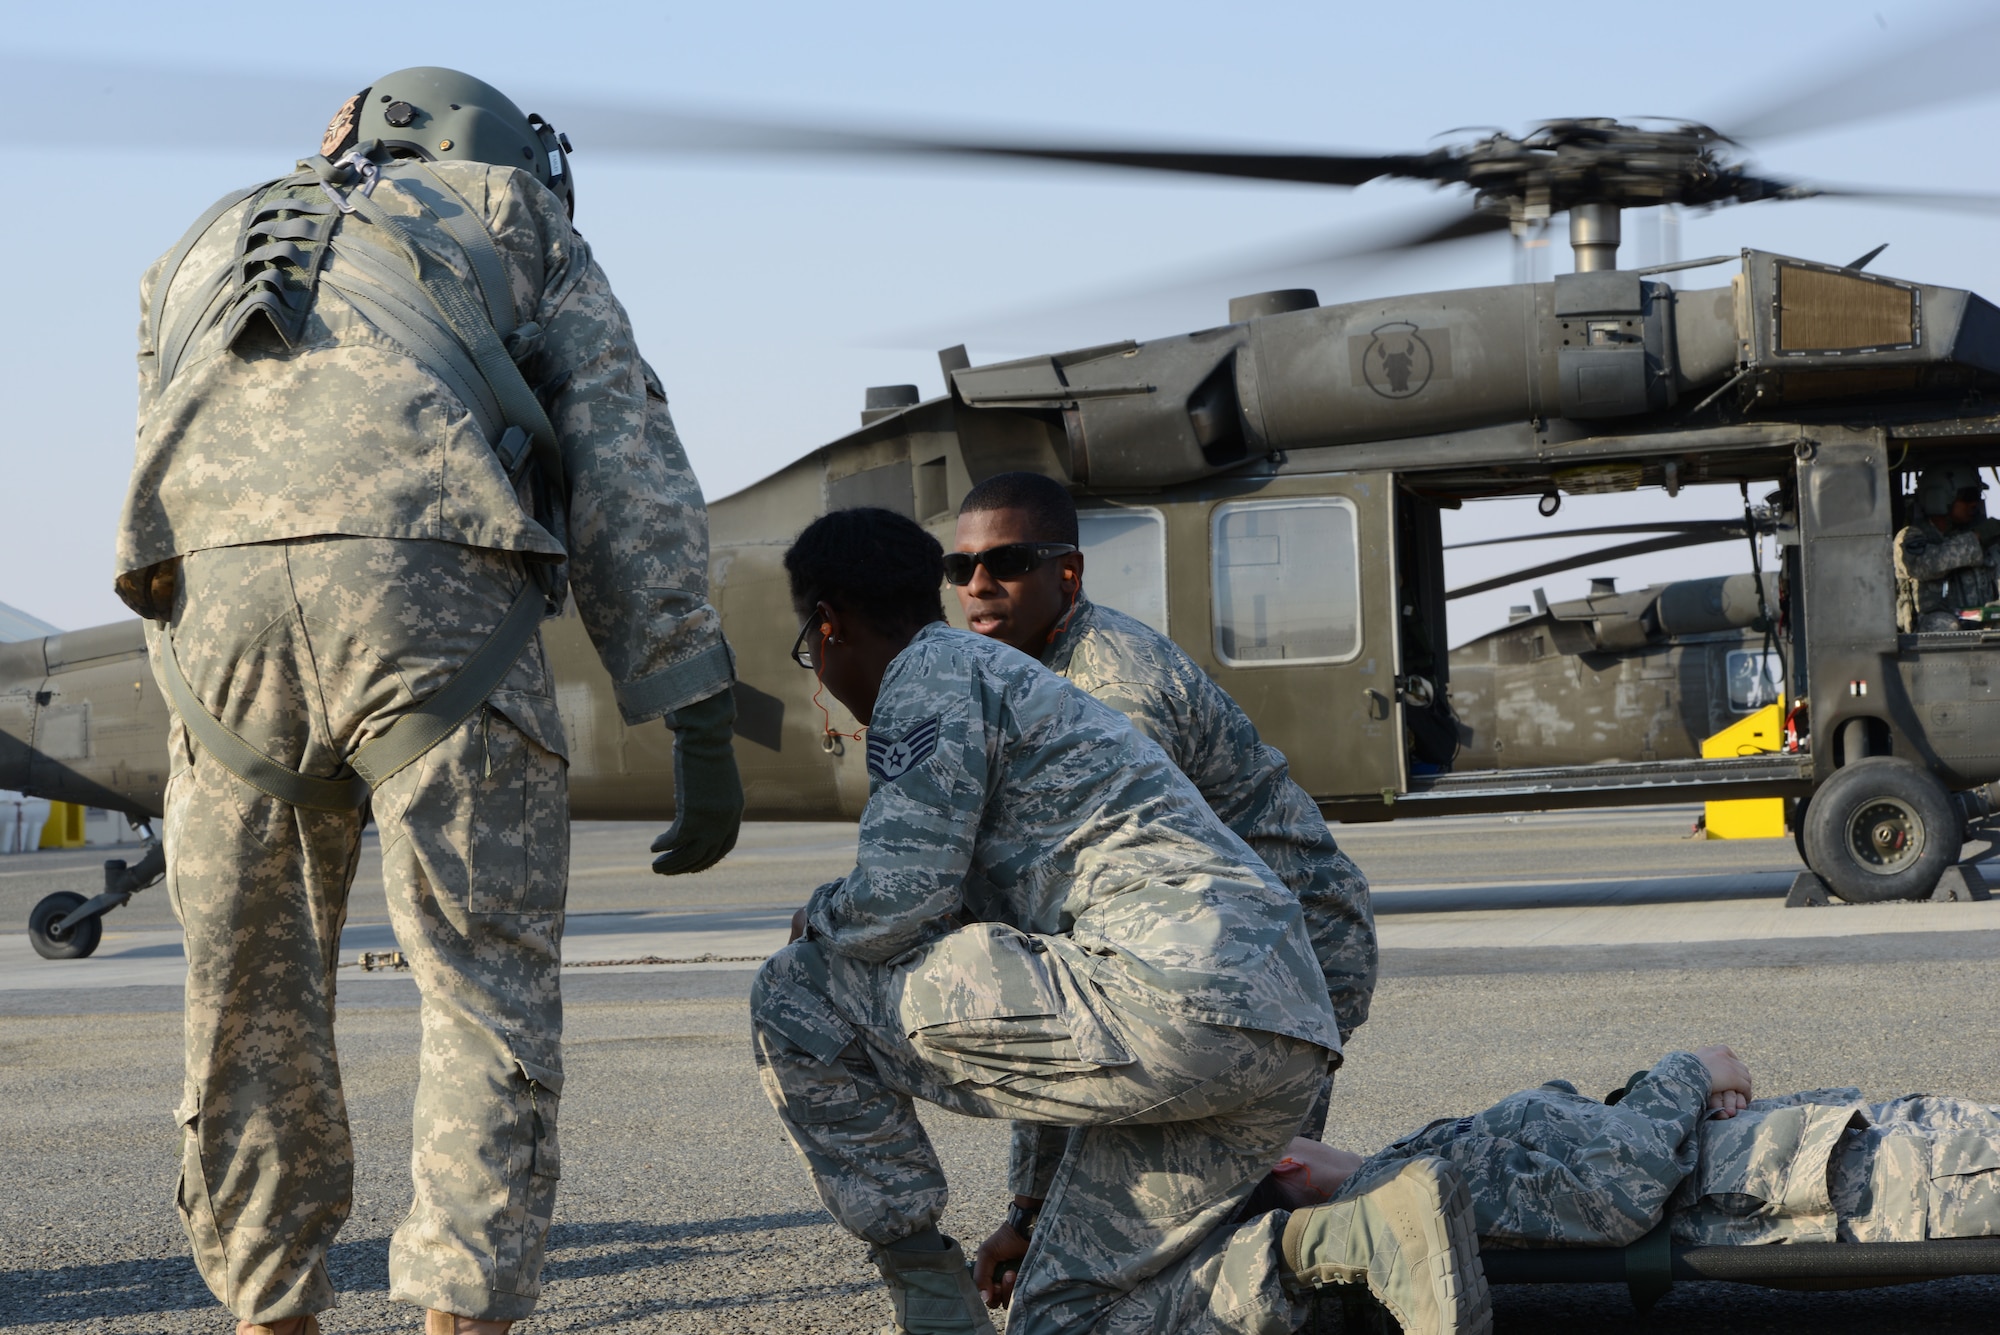 Senior Airman Dante Dubose (right), 386th Expeditionary Medical Group, prepares to give the signal to start transporting a patient to a UH-60 BlackHawk helicopter during medical evacuation training Nov. 14, 2014. Airmen from the 386th EMDG and Italian and Canadian air forces received the training Nov. 14 and 16. (U.S. Air Force photo by Tech. Sgt. Jared Marquis/released)